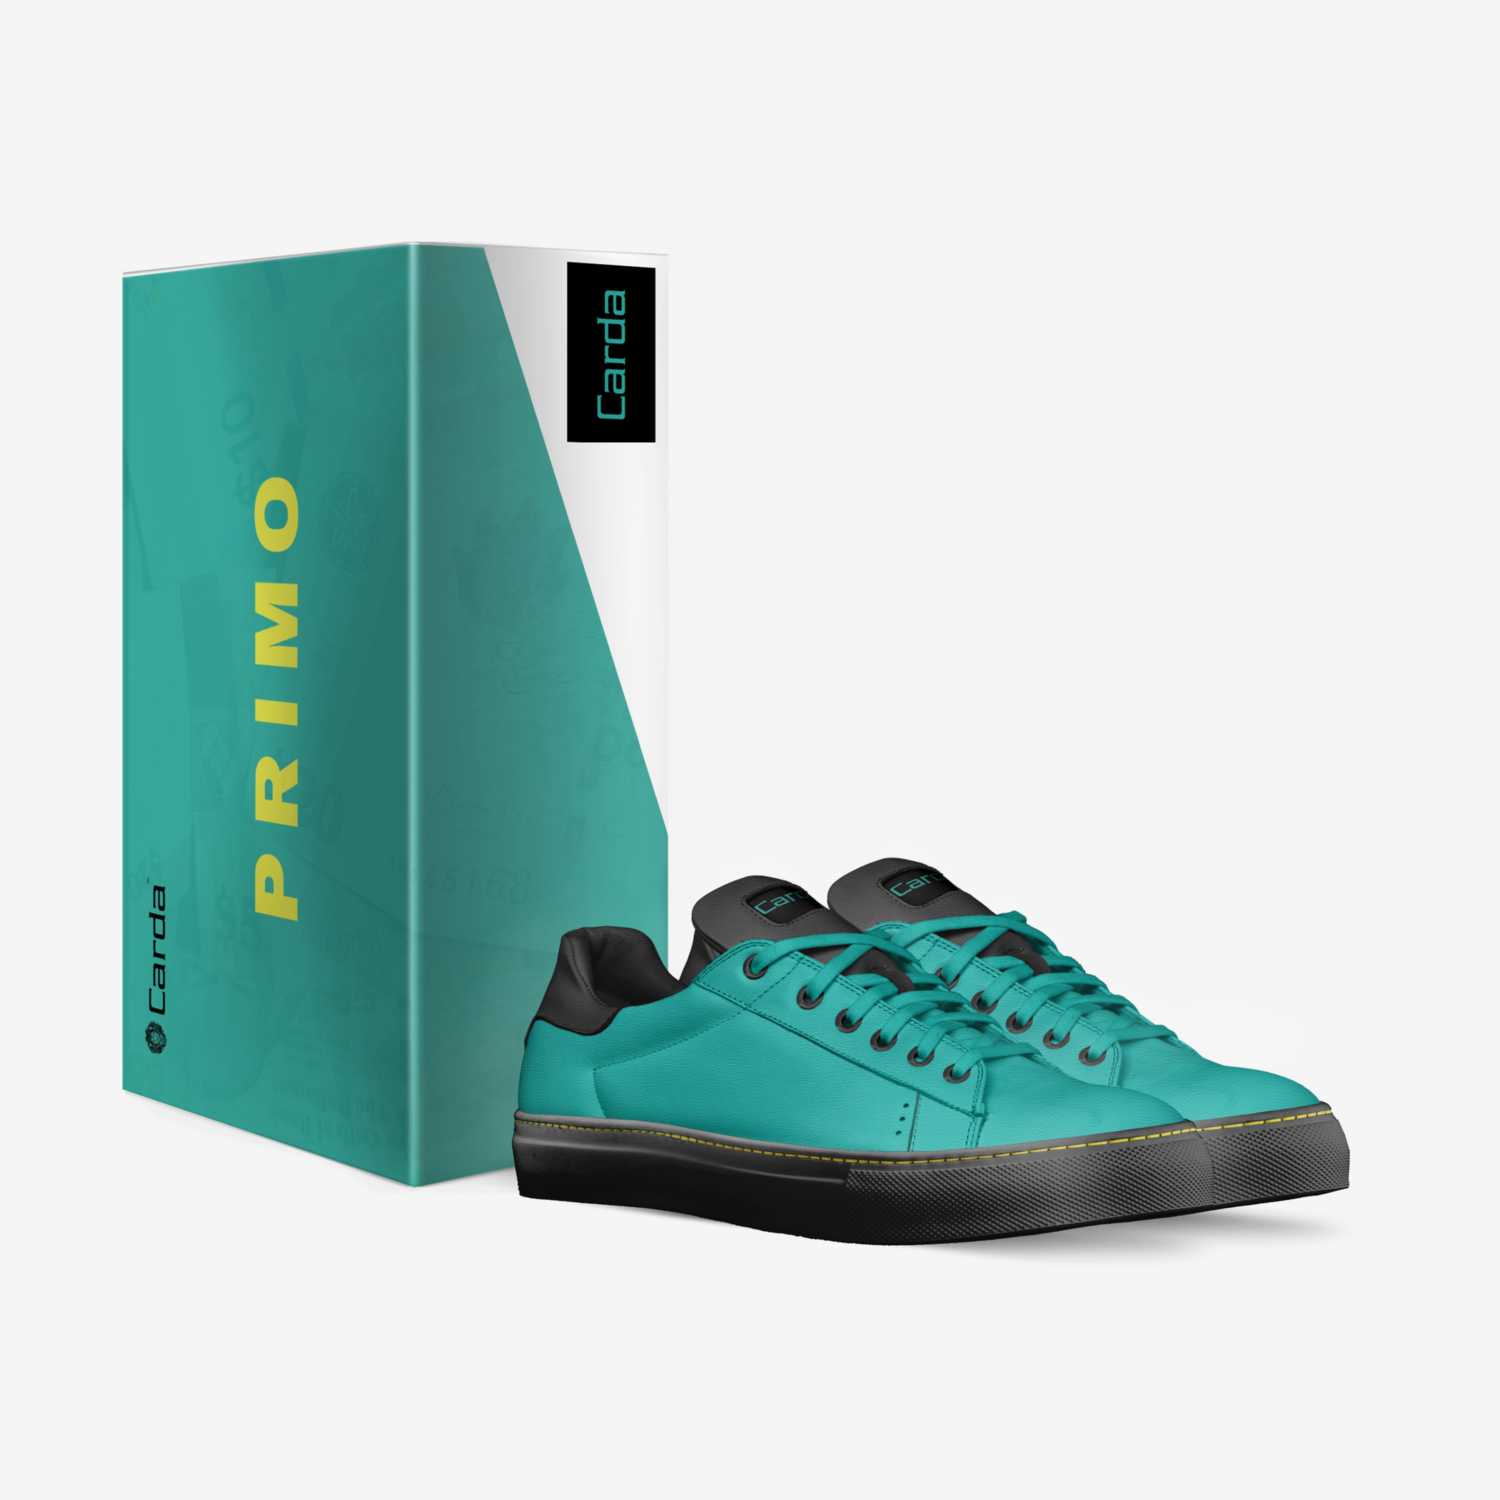 Primo (Aquatic) custom made in Italy shoes by Dane Strachan | Box view